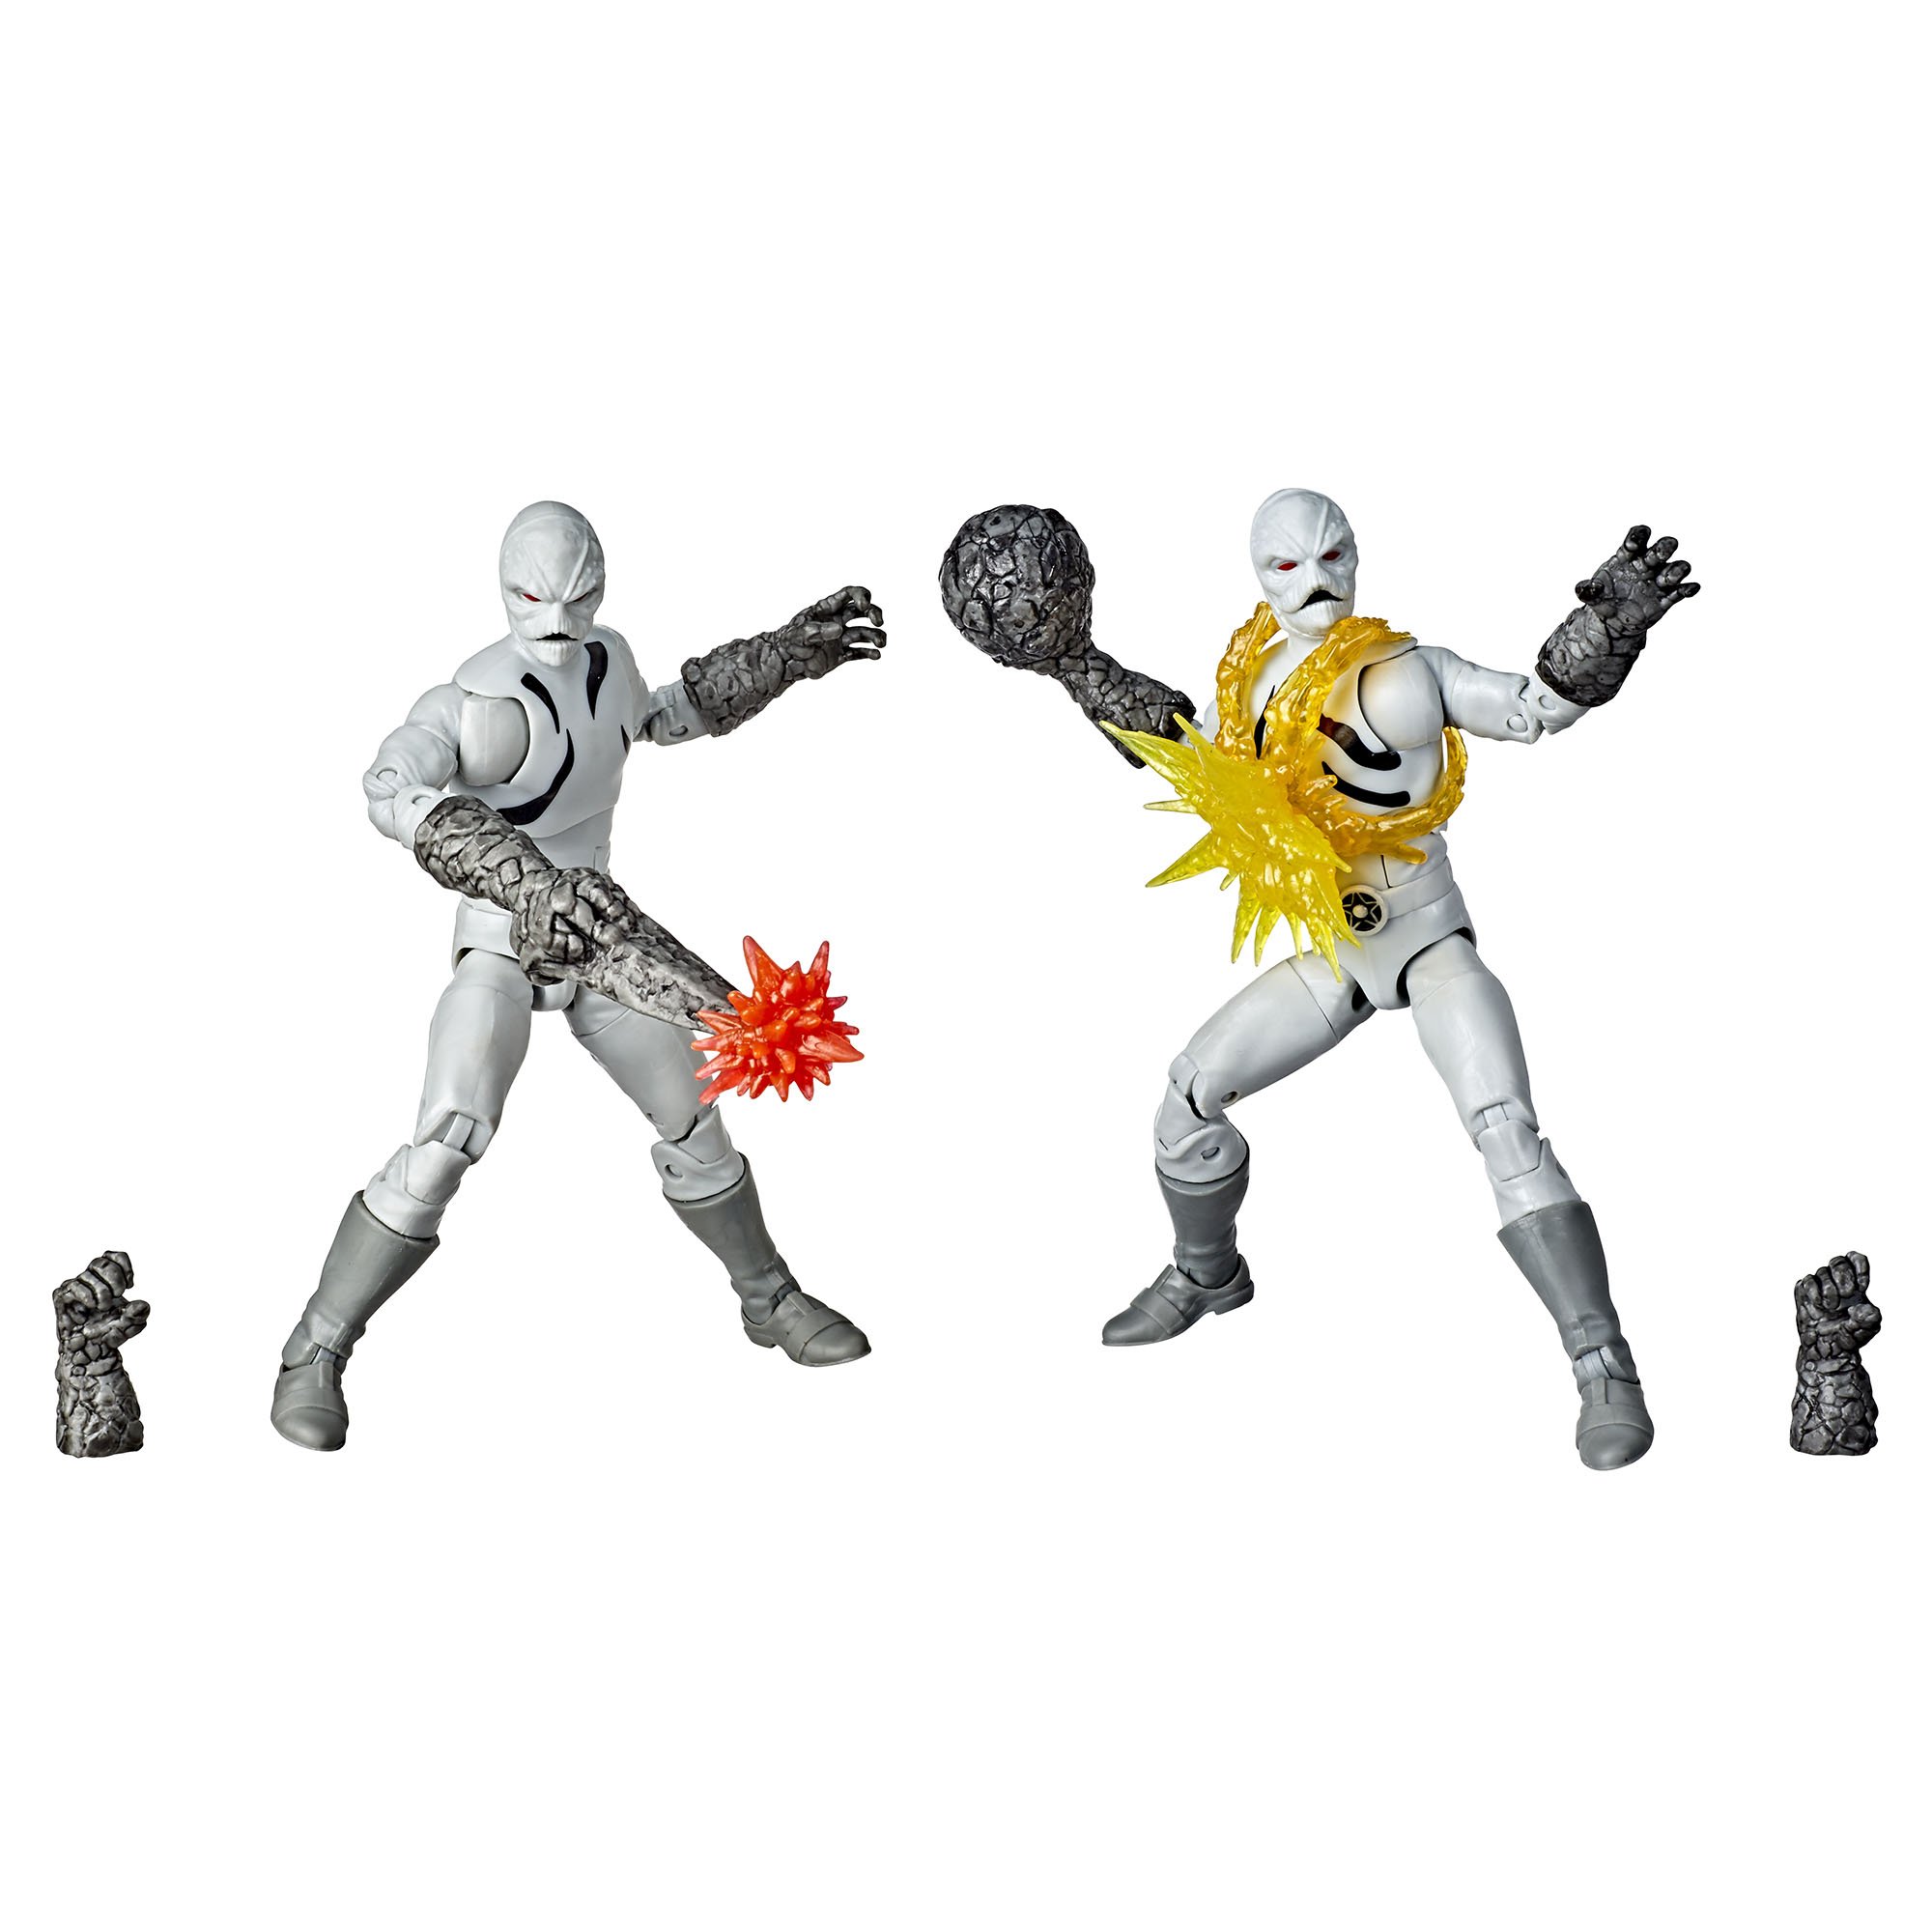 Mighty Morphin Putty Patrollers (Hasbro Pulse Exclusive)